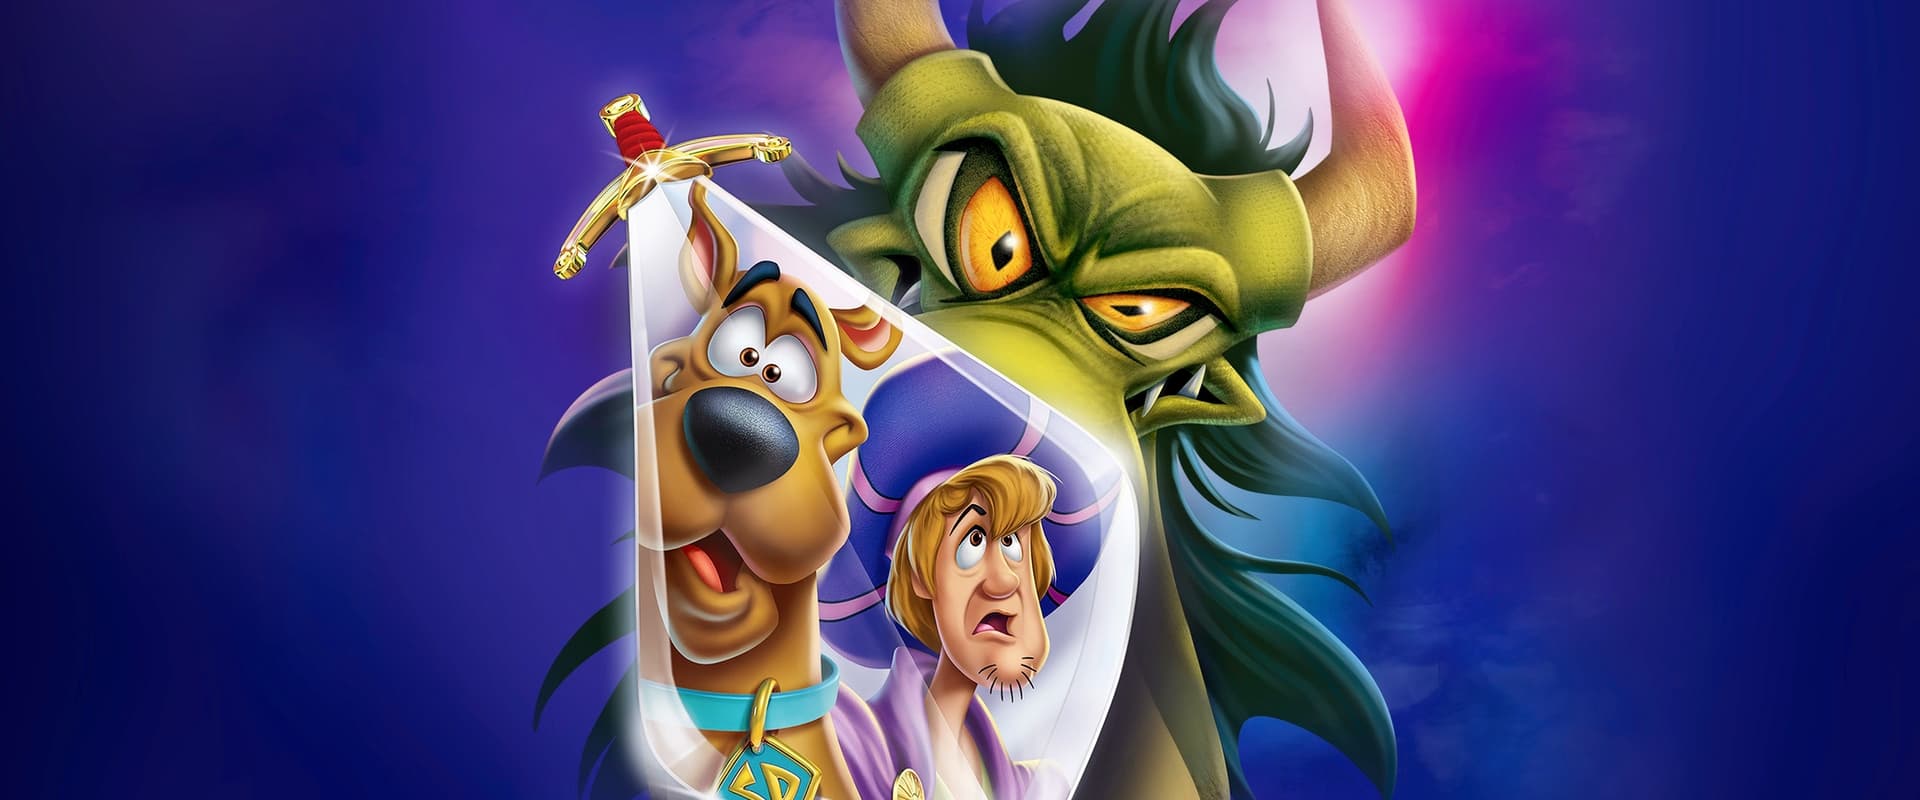 Watch Scooby-Doo! The Sword and the Scoob For Free Online 123movies.com